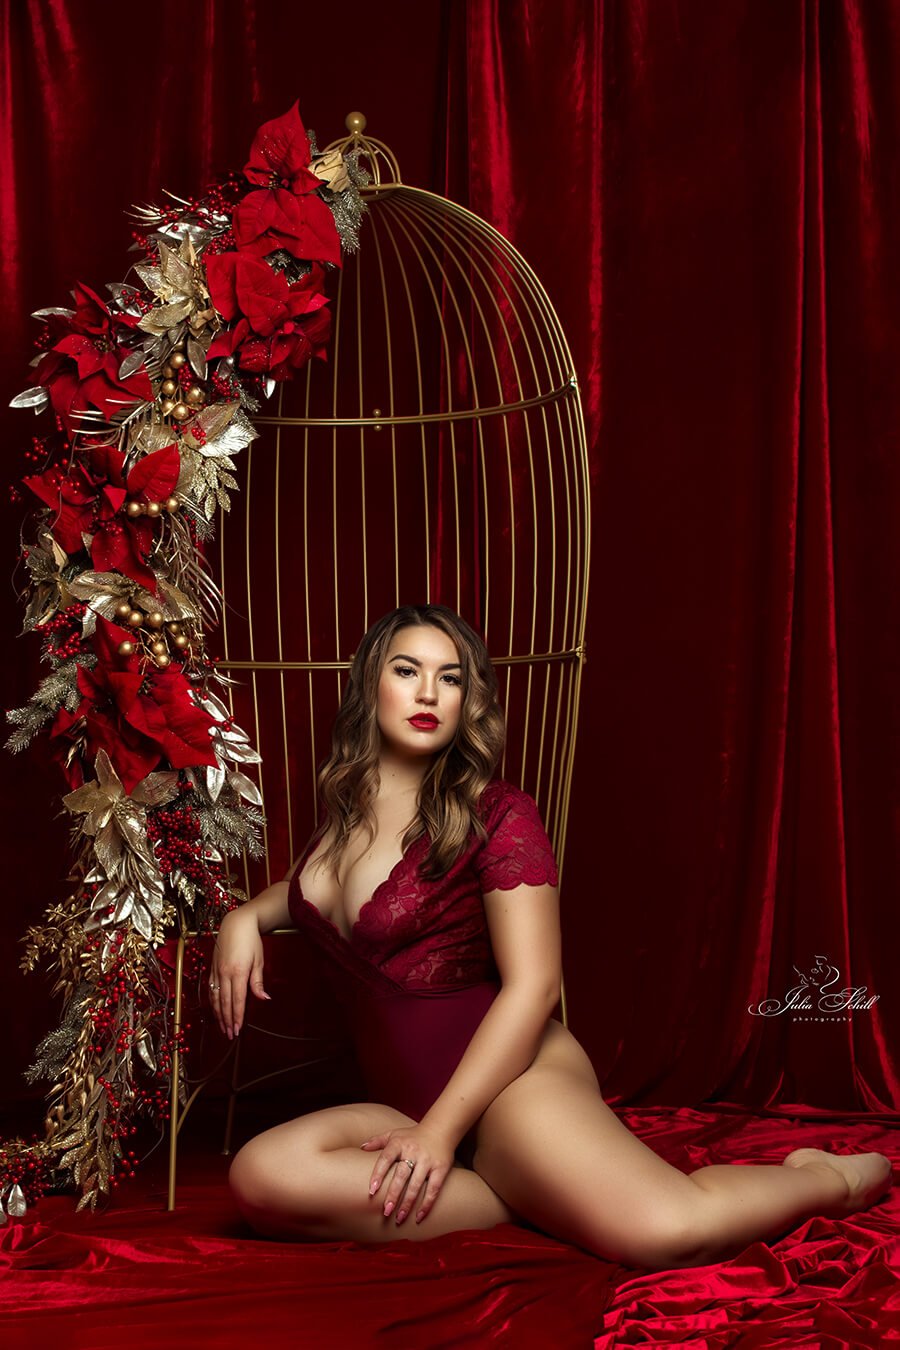 dark blond model poses in a studio, sitting next to a metal chair that resembles a cage with several red details.  she is wearing a red bodysuit during a boudoir session.